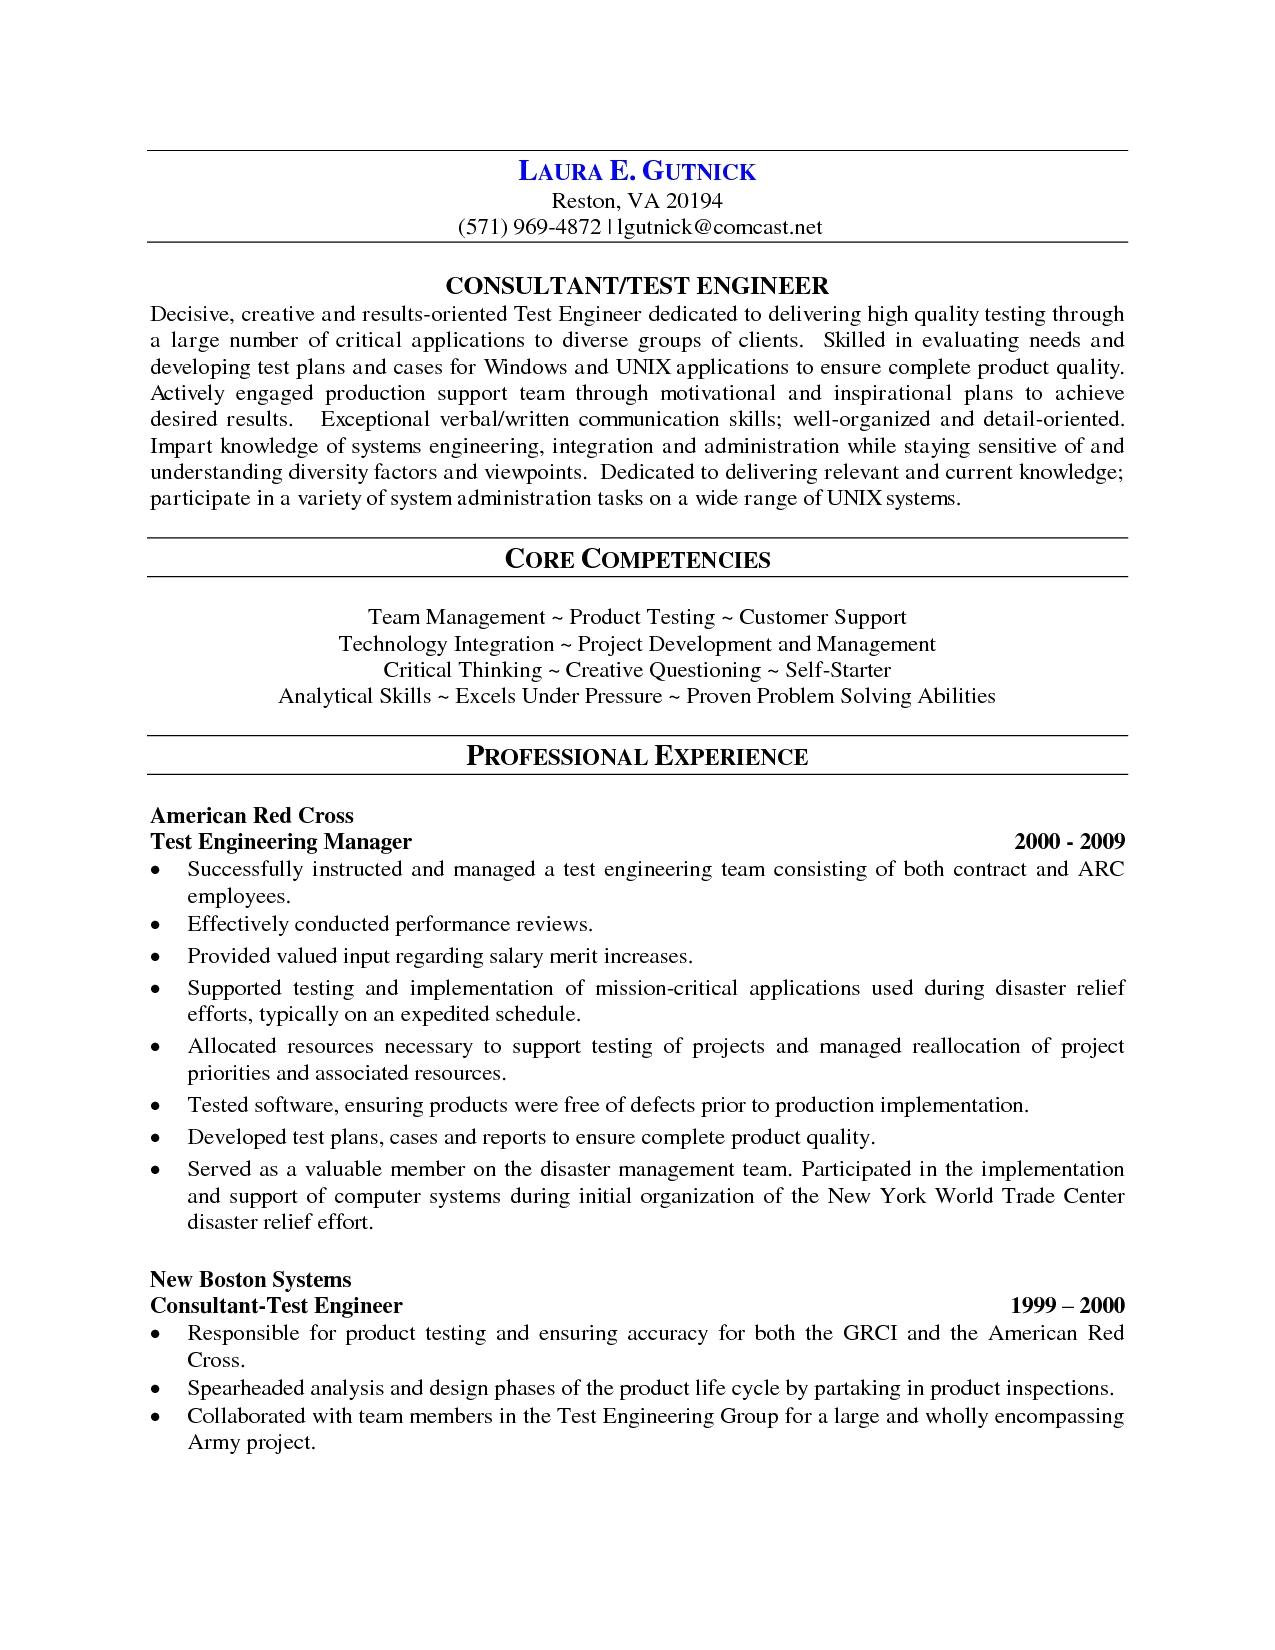 sample experience resume format lovely software testing resume samples 2 years experience